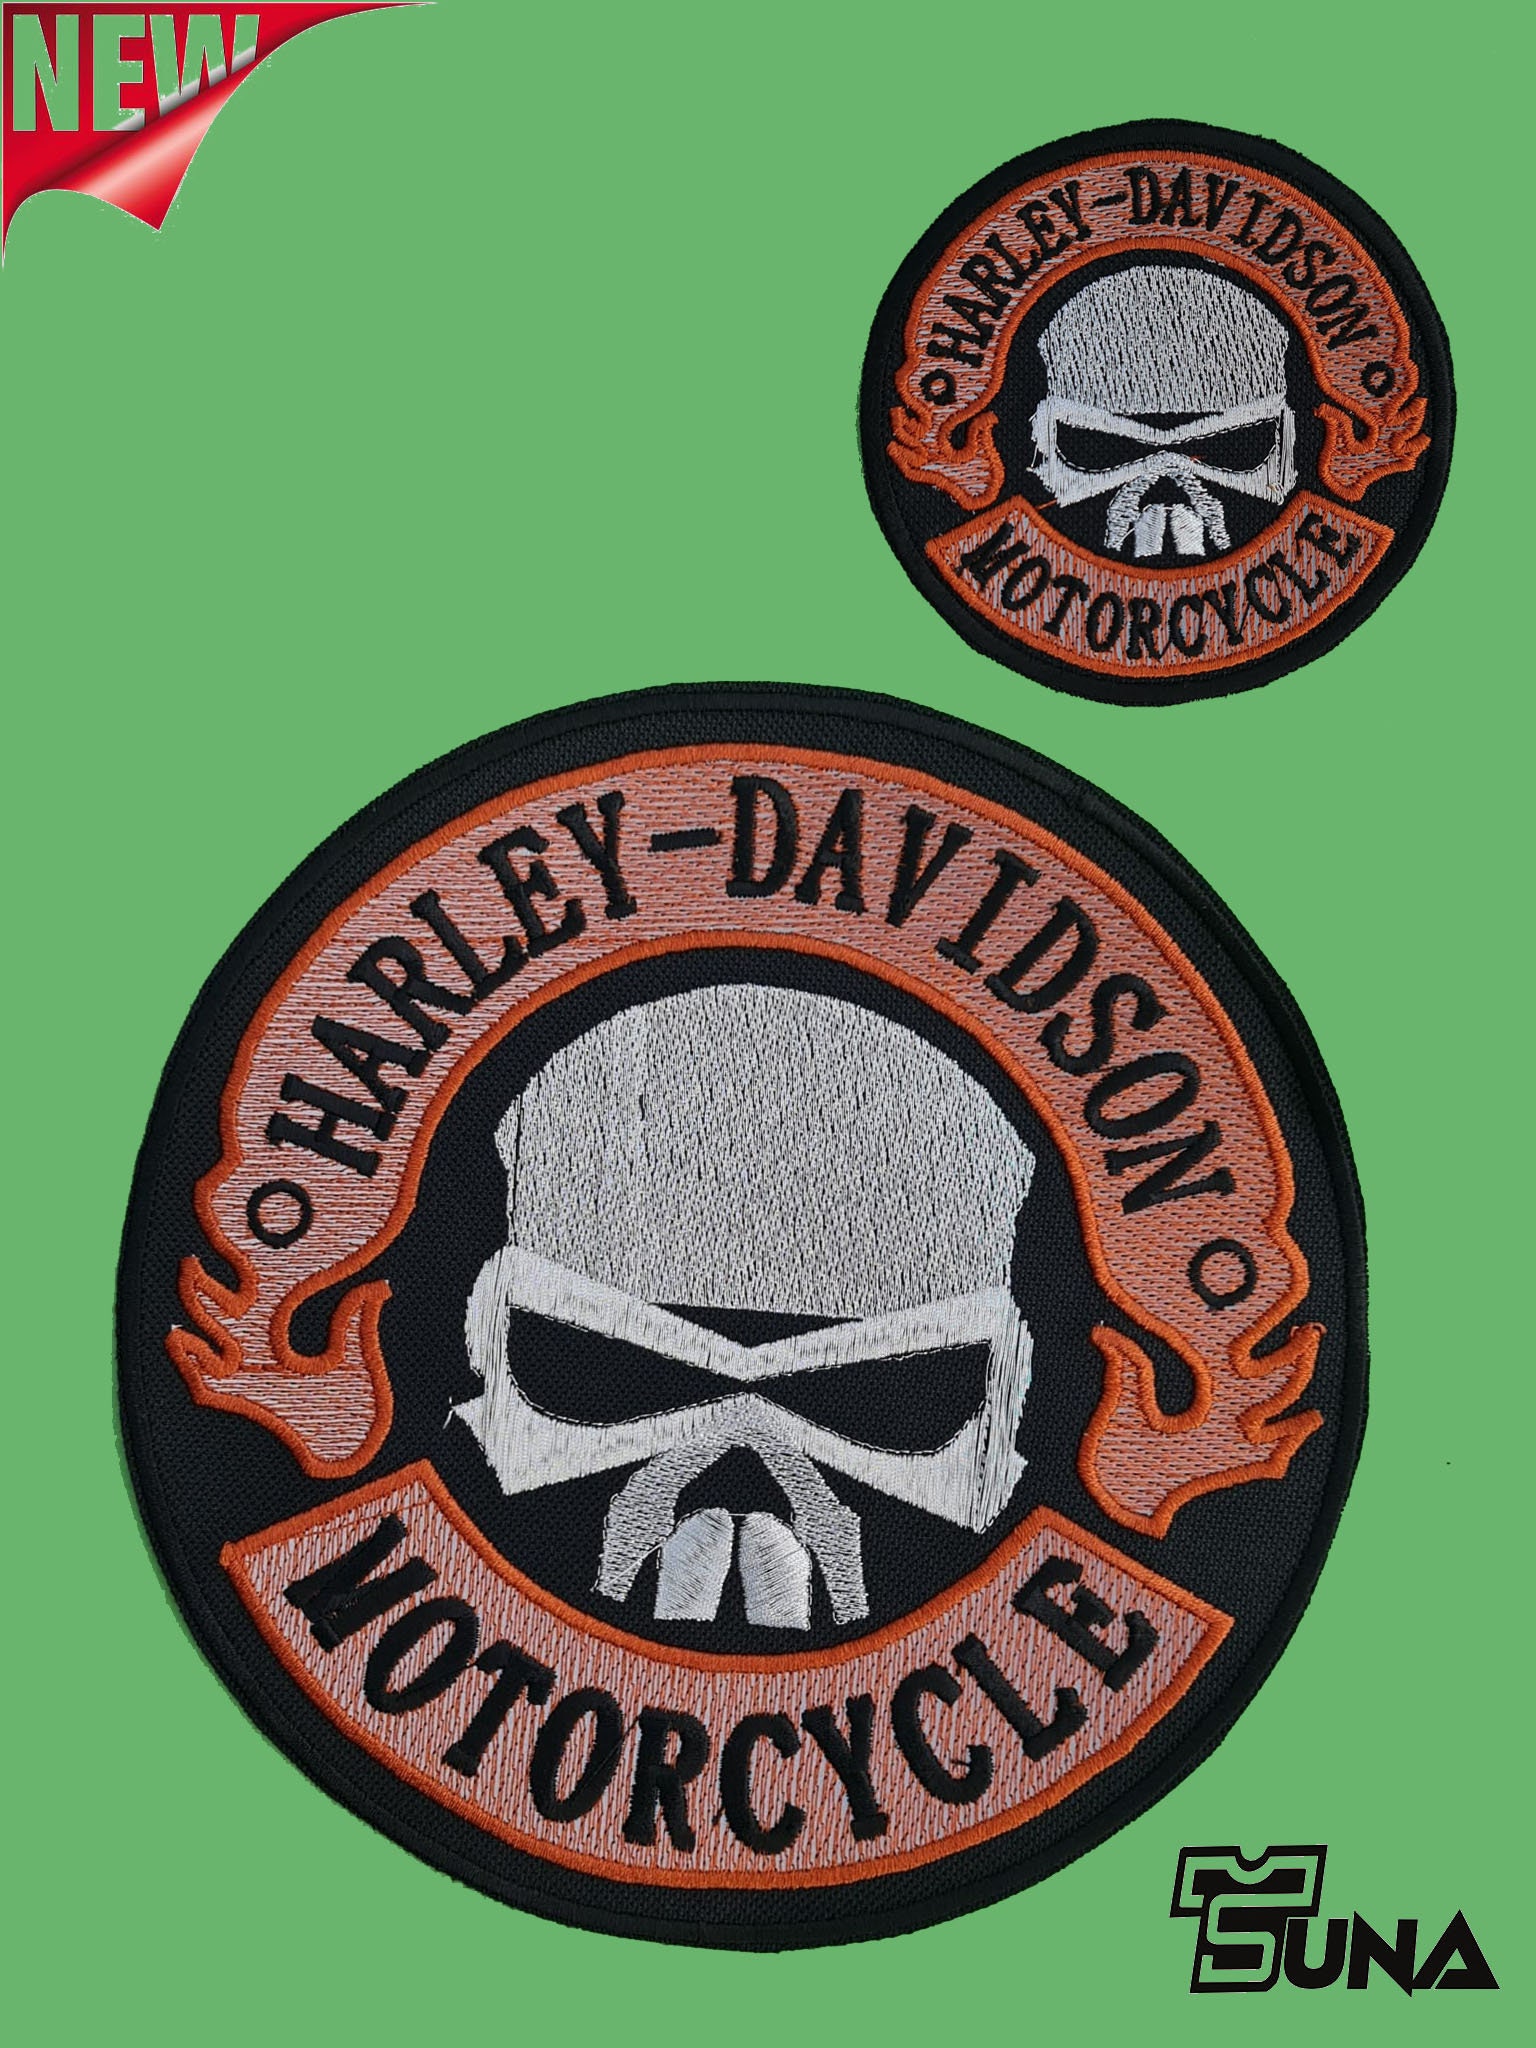 Large Skull Badges Embroidered Back Punk Patches , Biker Patches for Vests,  Biker Patch Iron On, Patches for Jackets 